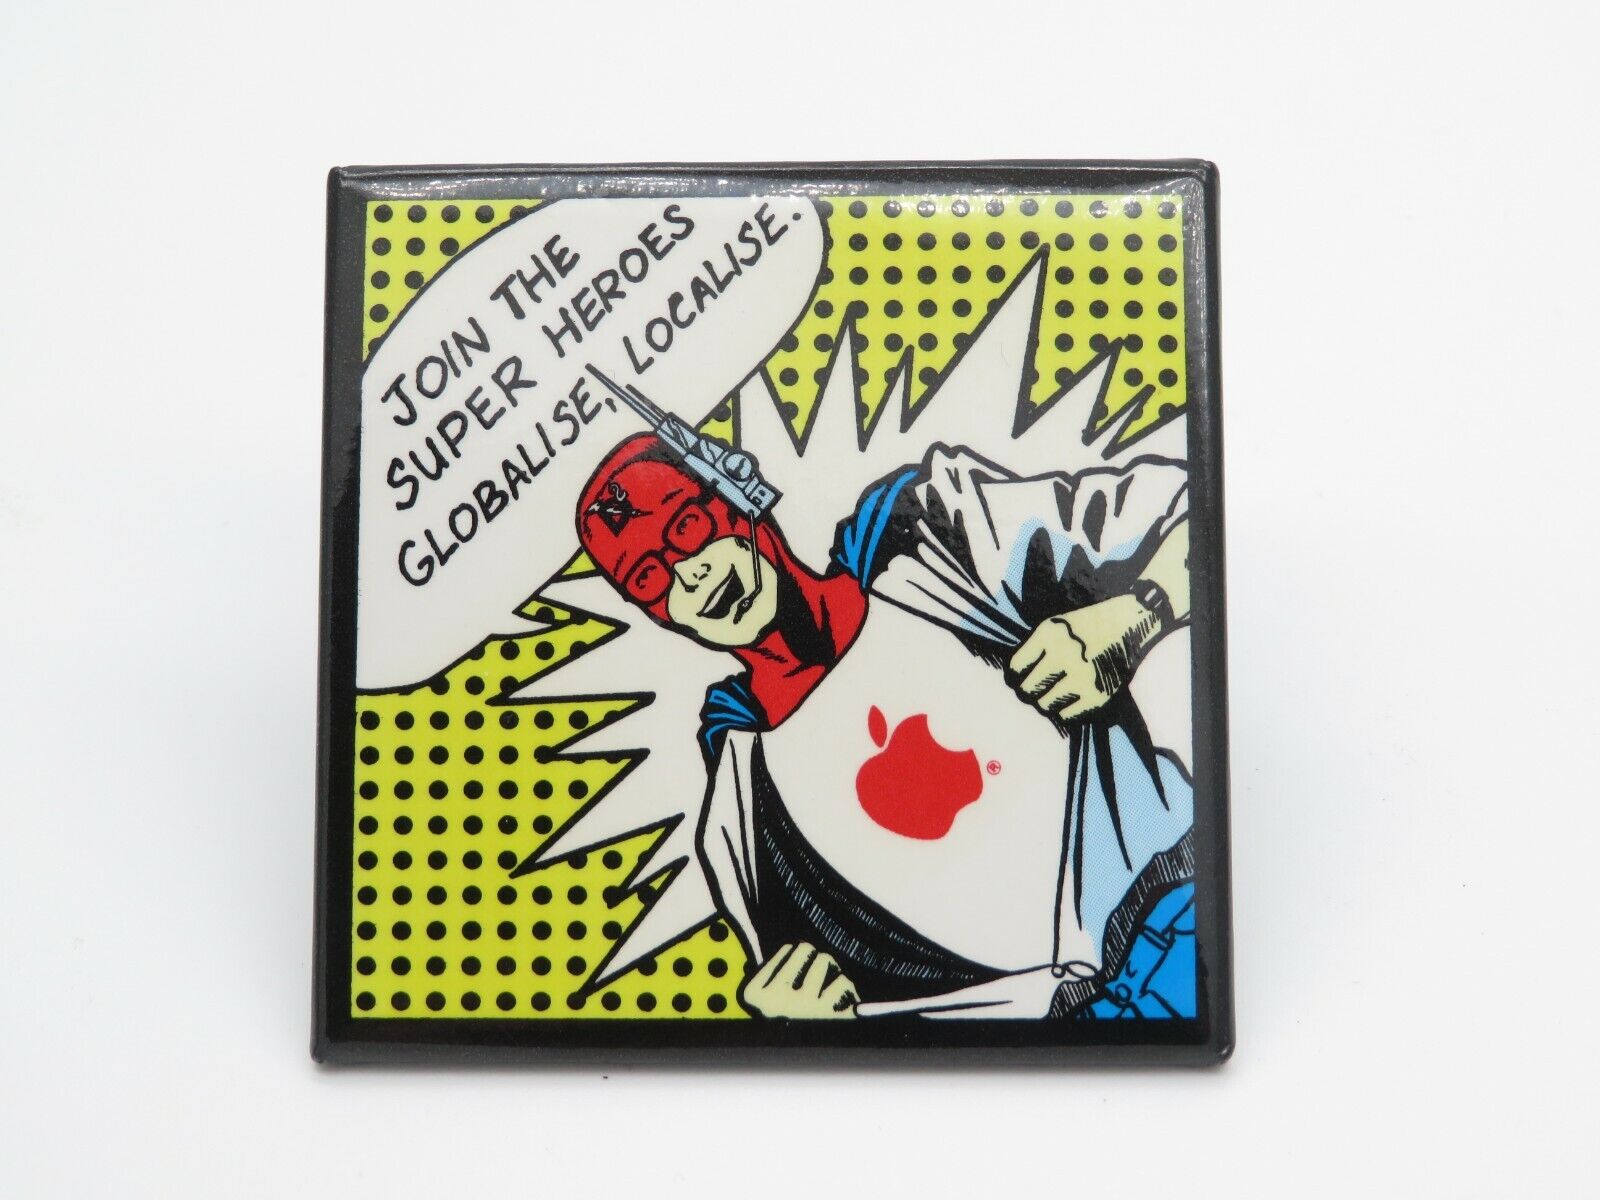 Vintage Apple Computer Employee Pin Back Button, Super Heroes Globalise Localise